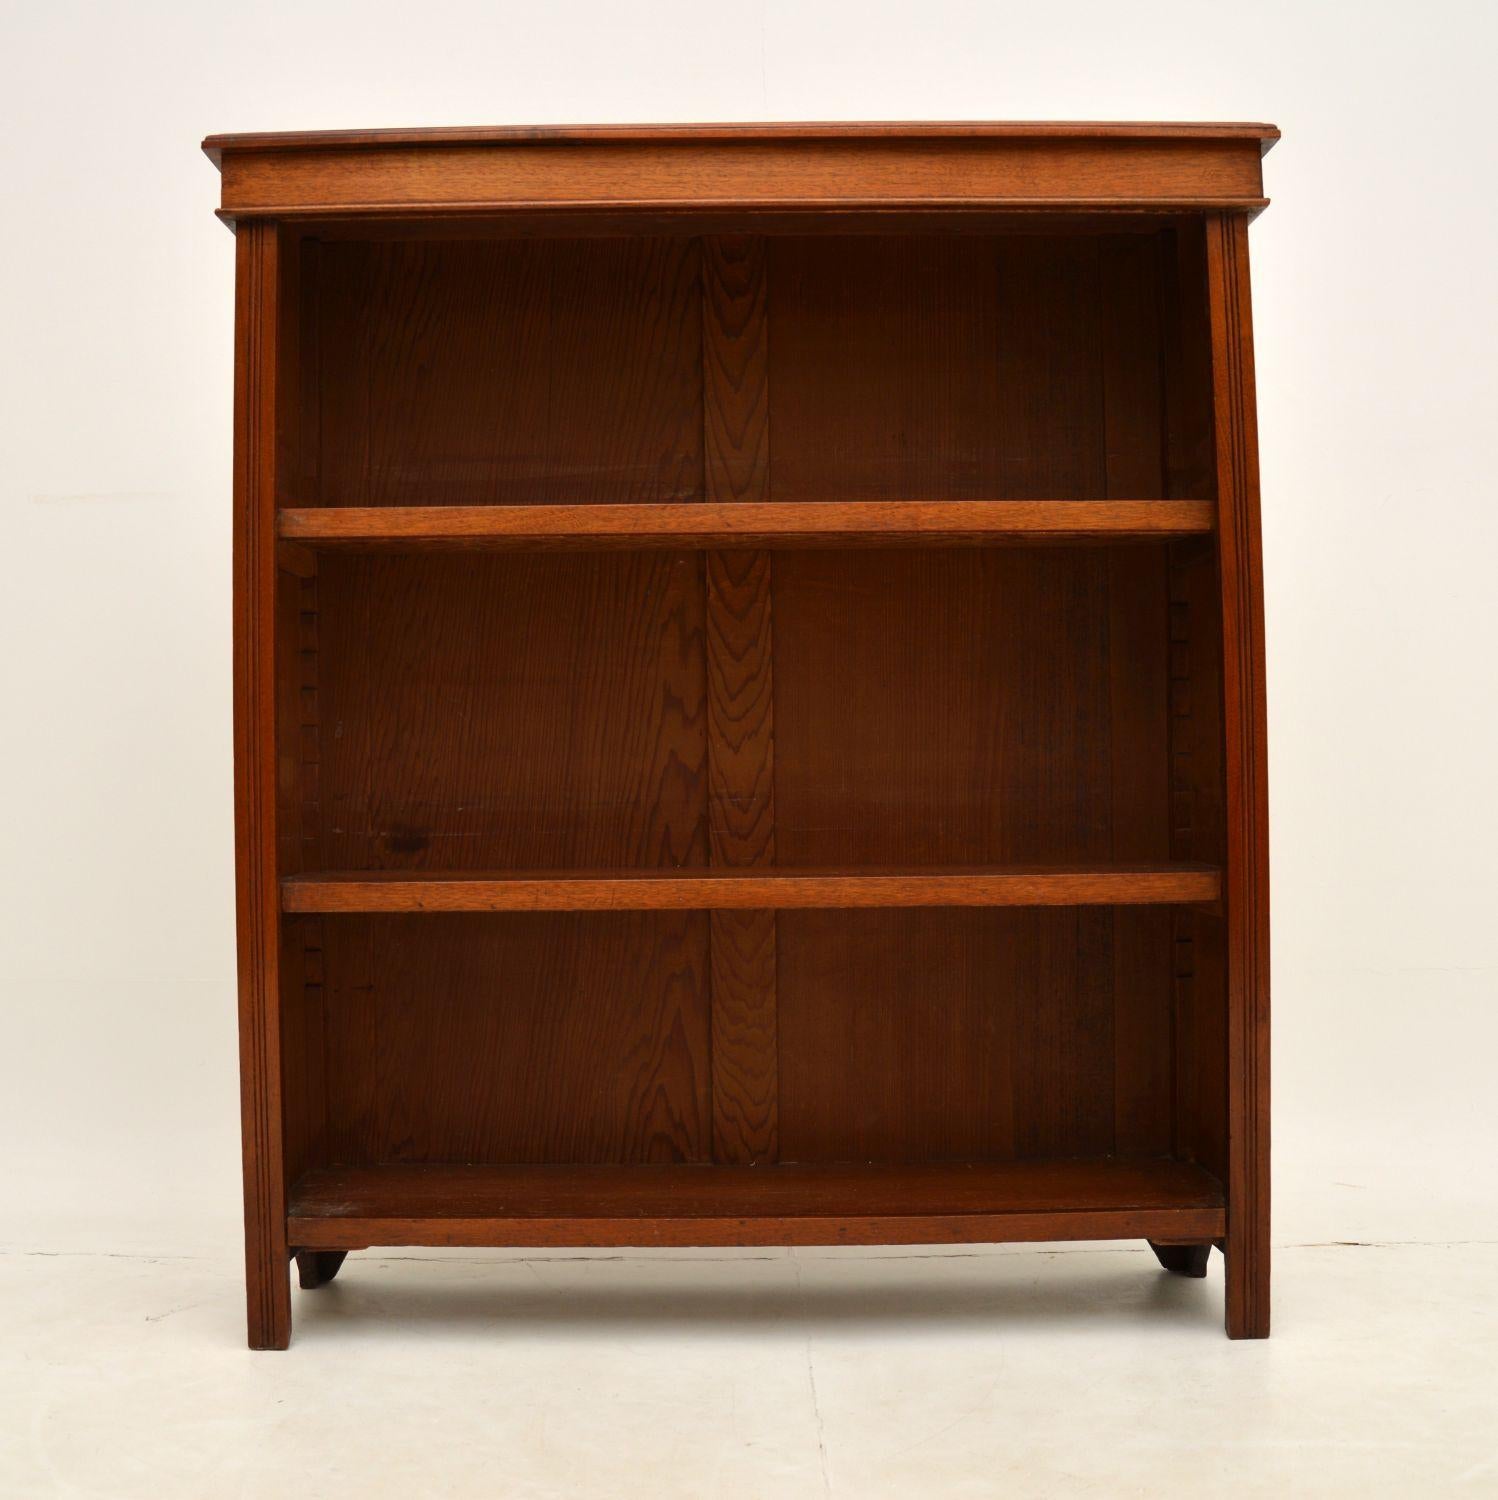 A smart and useful antique Victorian open bookcase in solid walnut. This was made in England & it dates from around the 1880-1890’s period.

The quality is excellent and this is a lovely size. It has two removable shelves that can be adjusted with